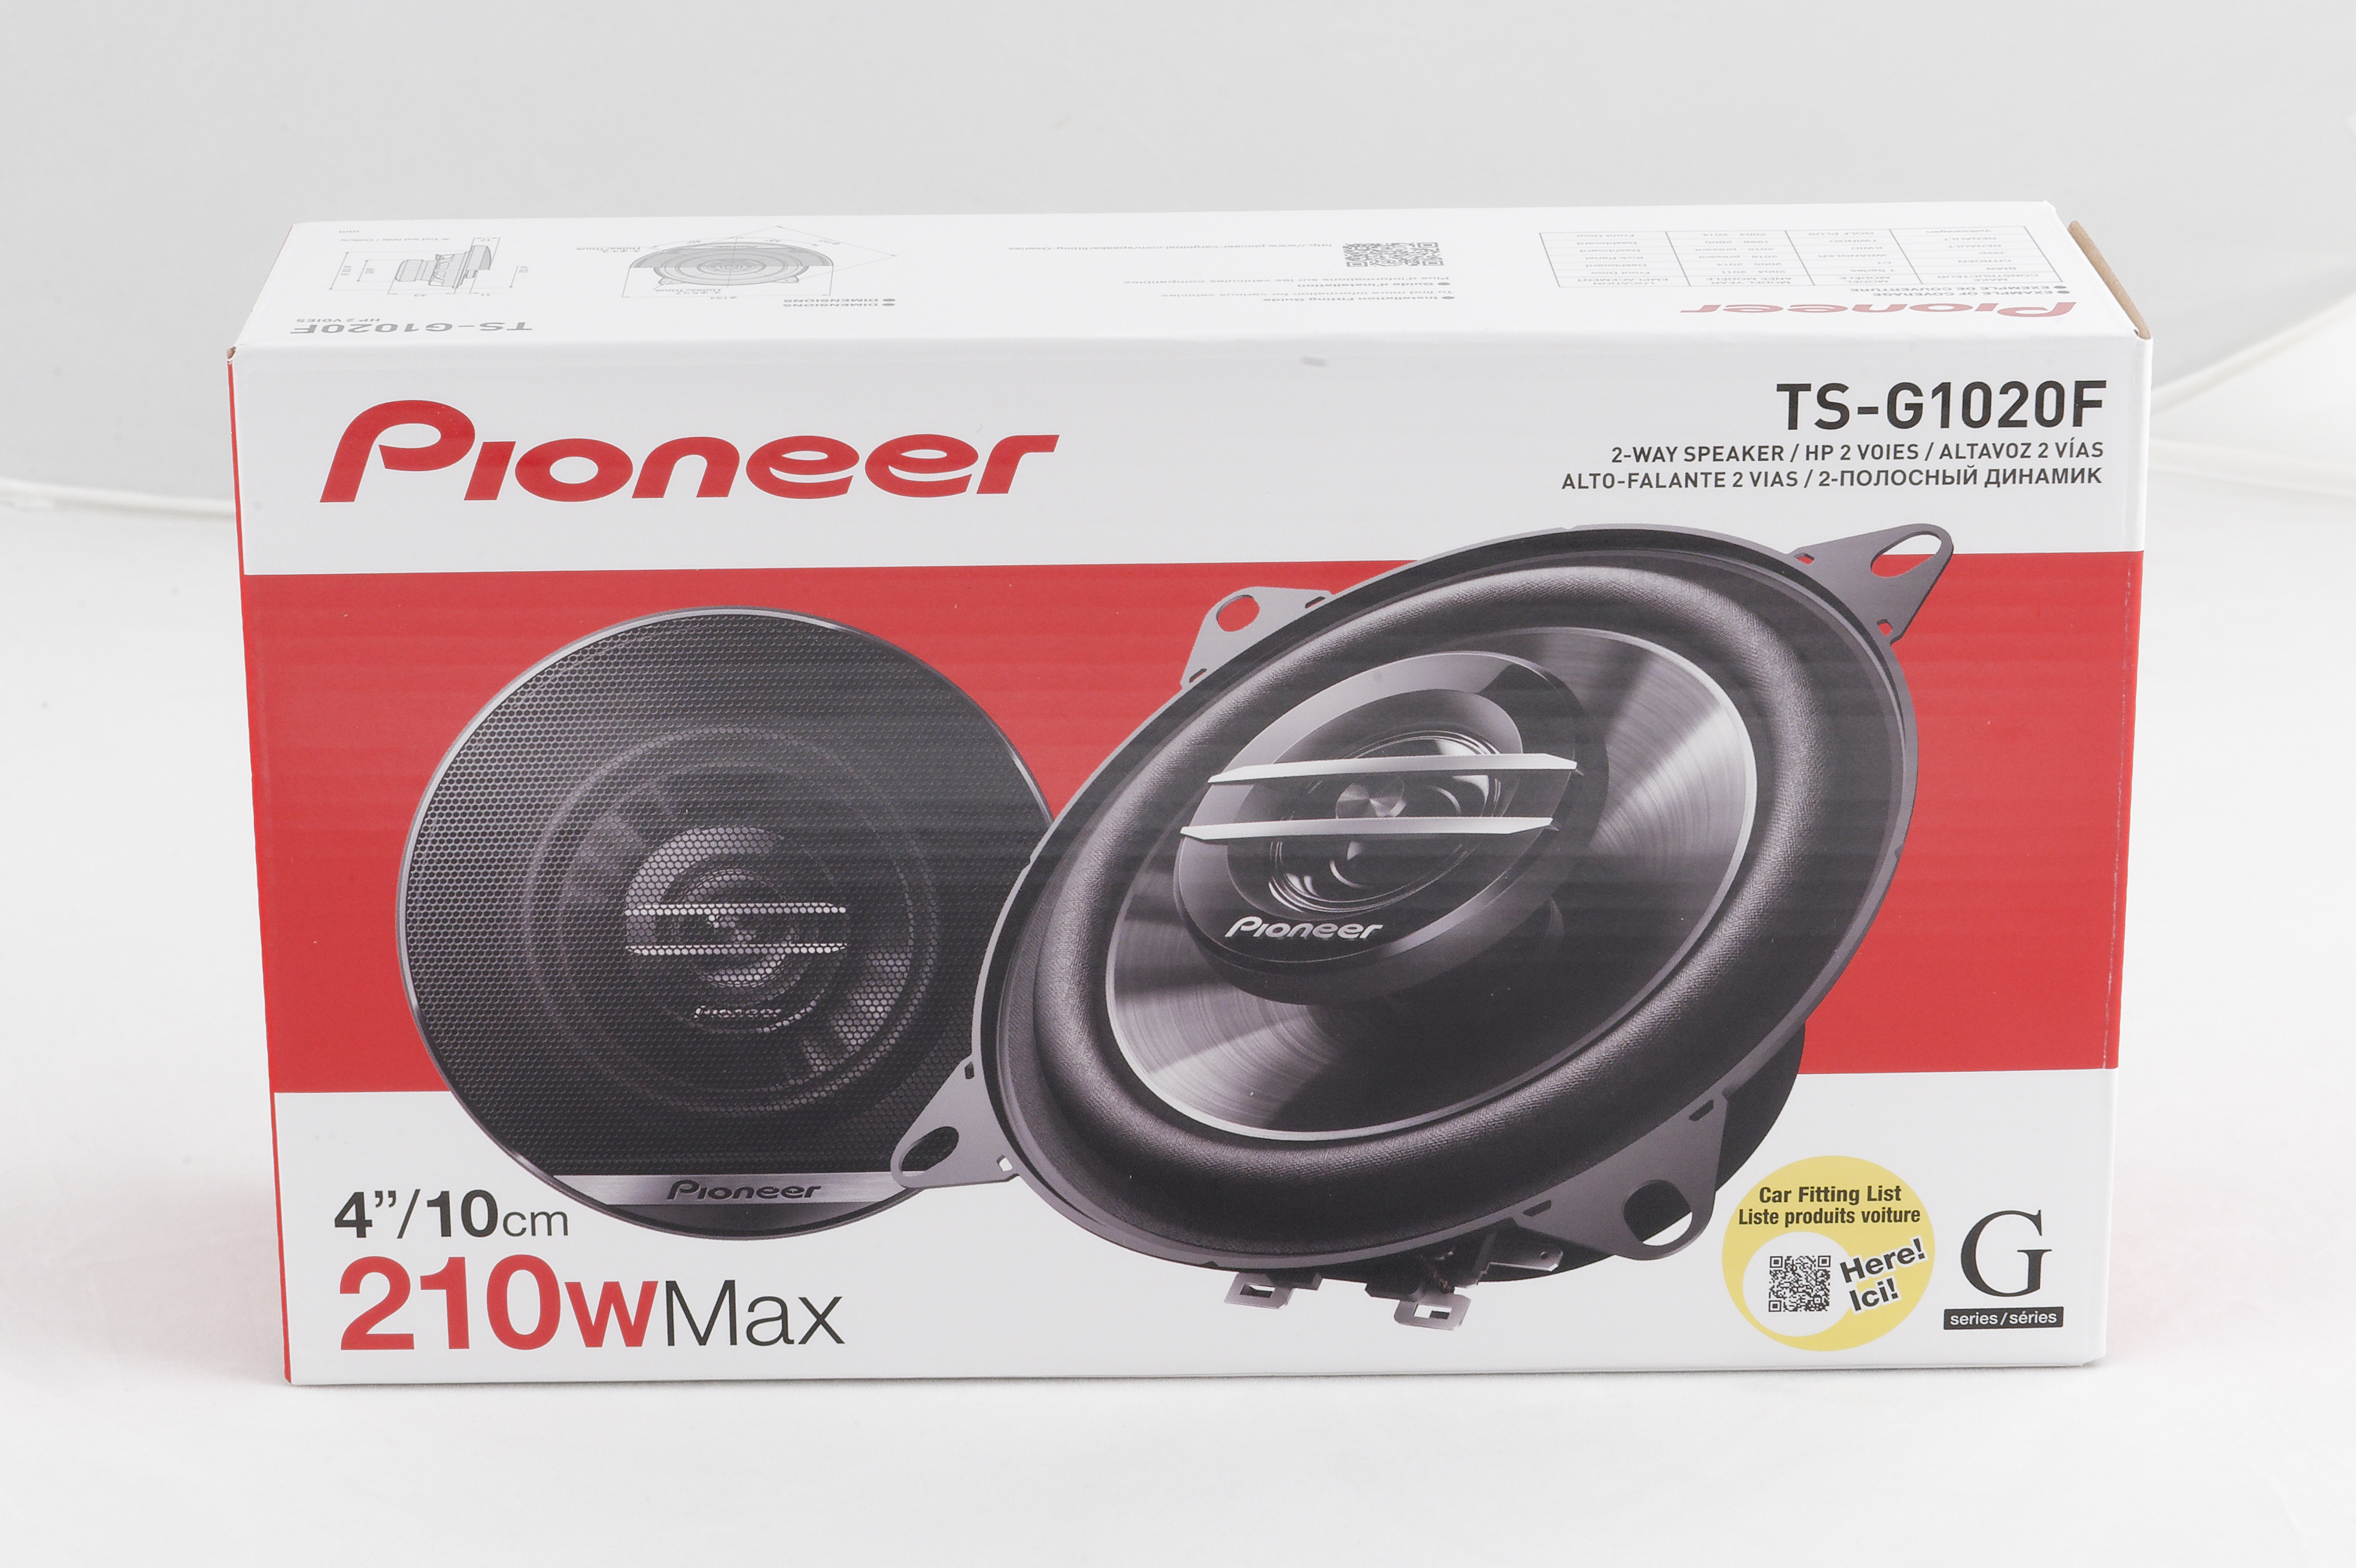 https://products.pioneer-car.eu/sites/pioneer_products/files/product-images/4.ts-g1020f_1.jpg